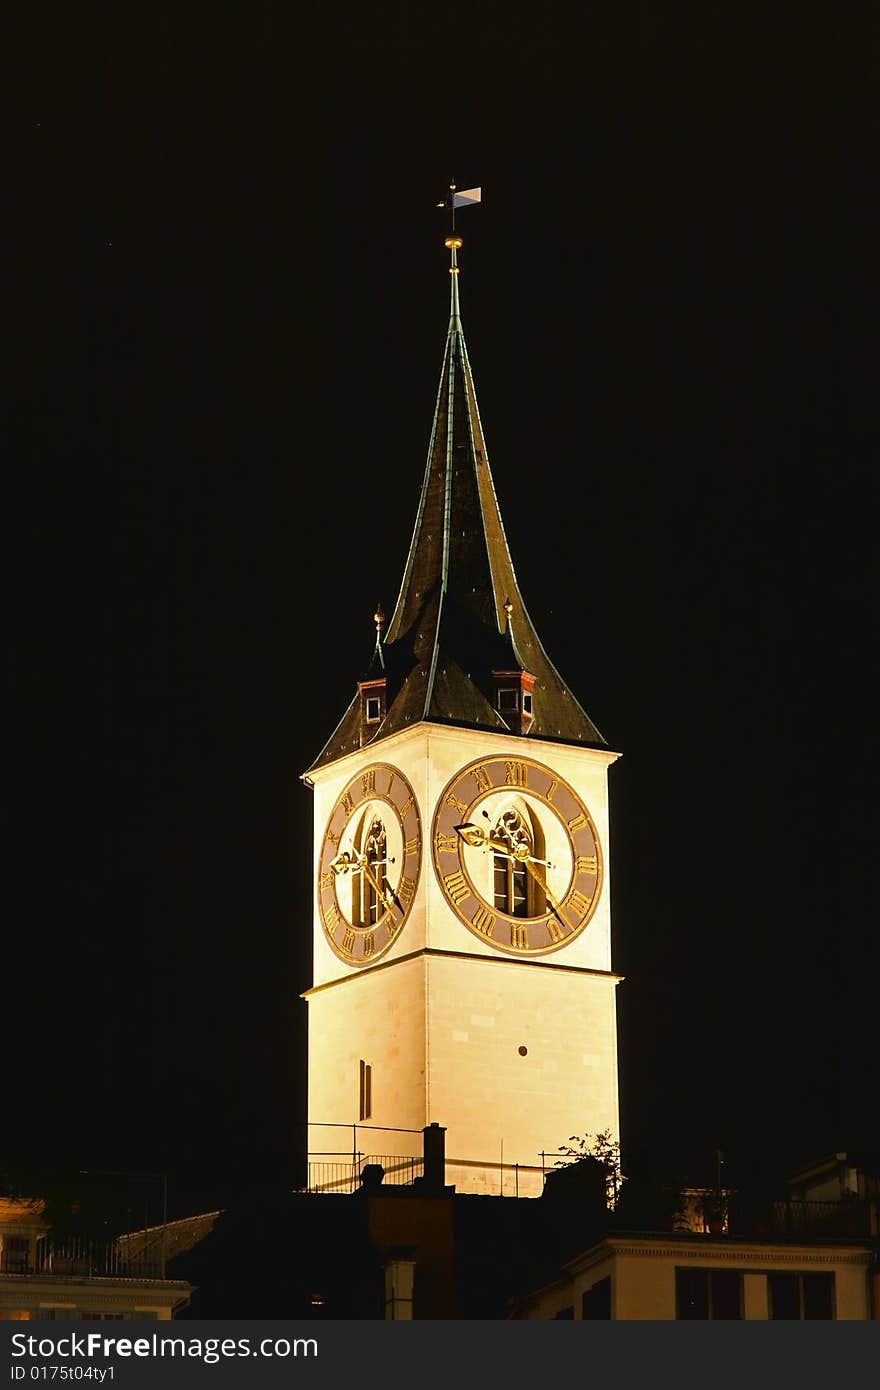 St. Peter's Church tower with Europe?s largest church clock face in Zurich at night. St. Peter's Church tower with Europe?s largest church clock face in Zurich at night